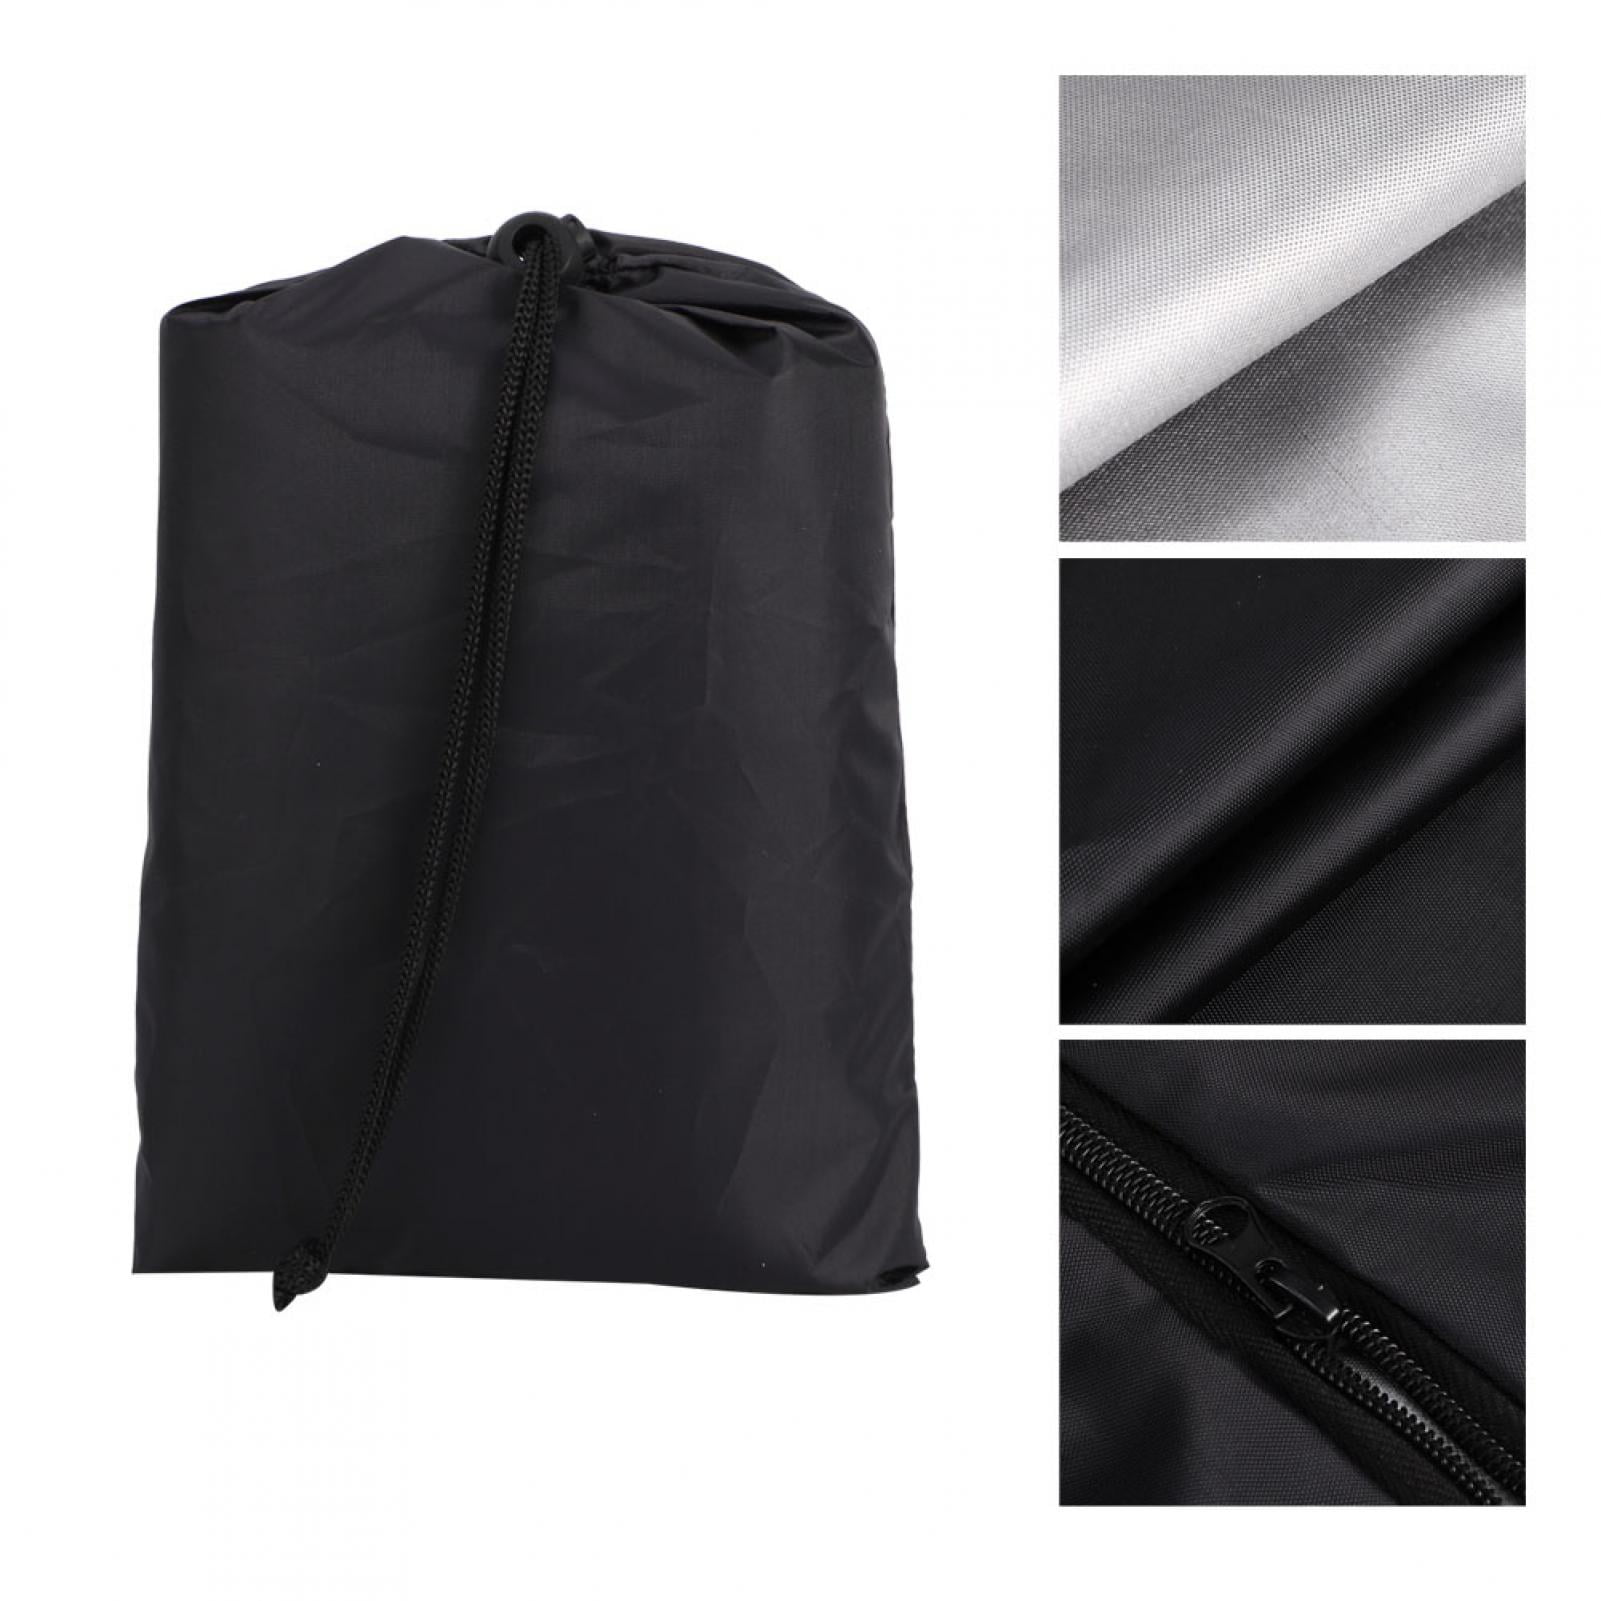 Gupbes Folding Bed Storage Cover,Folding Bed Dust Cover,Black Portable ...